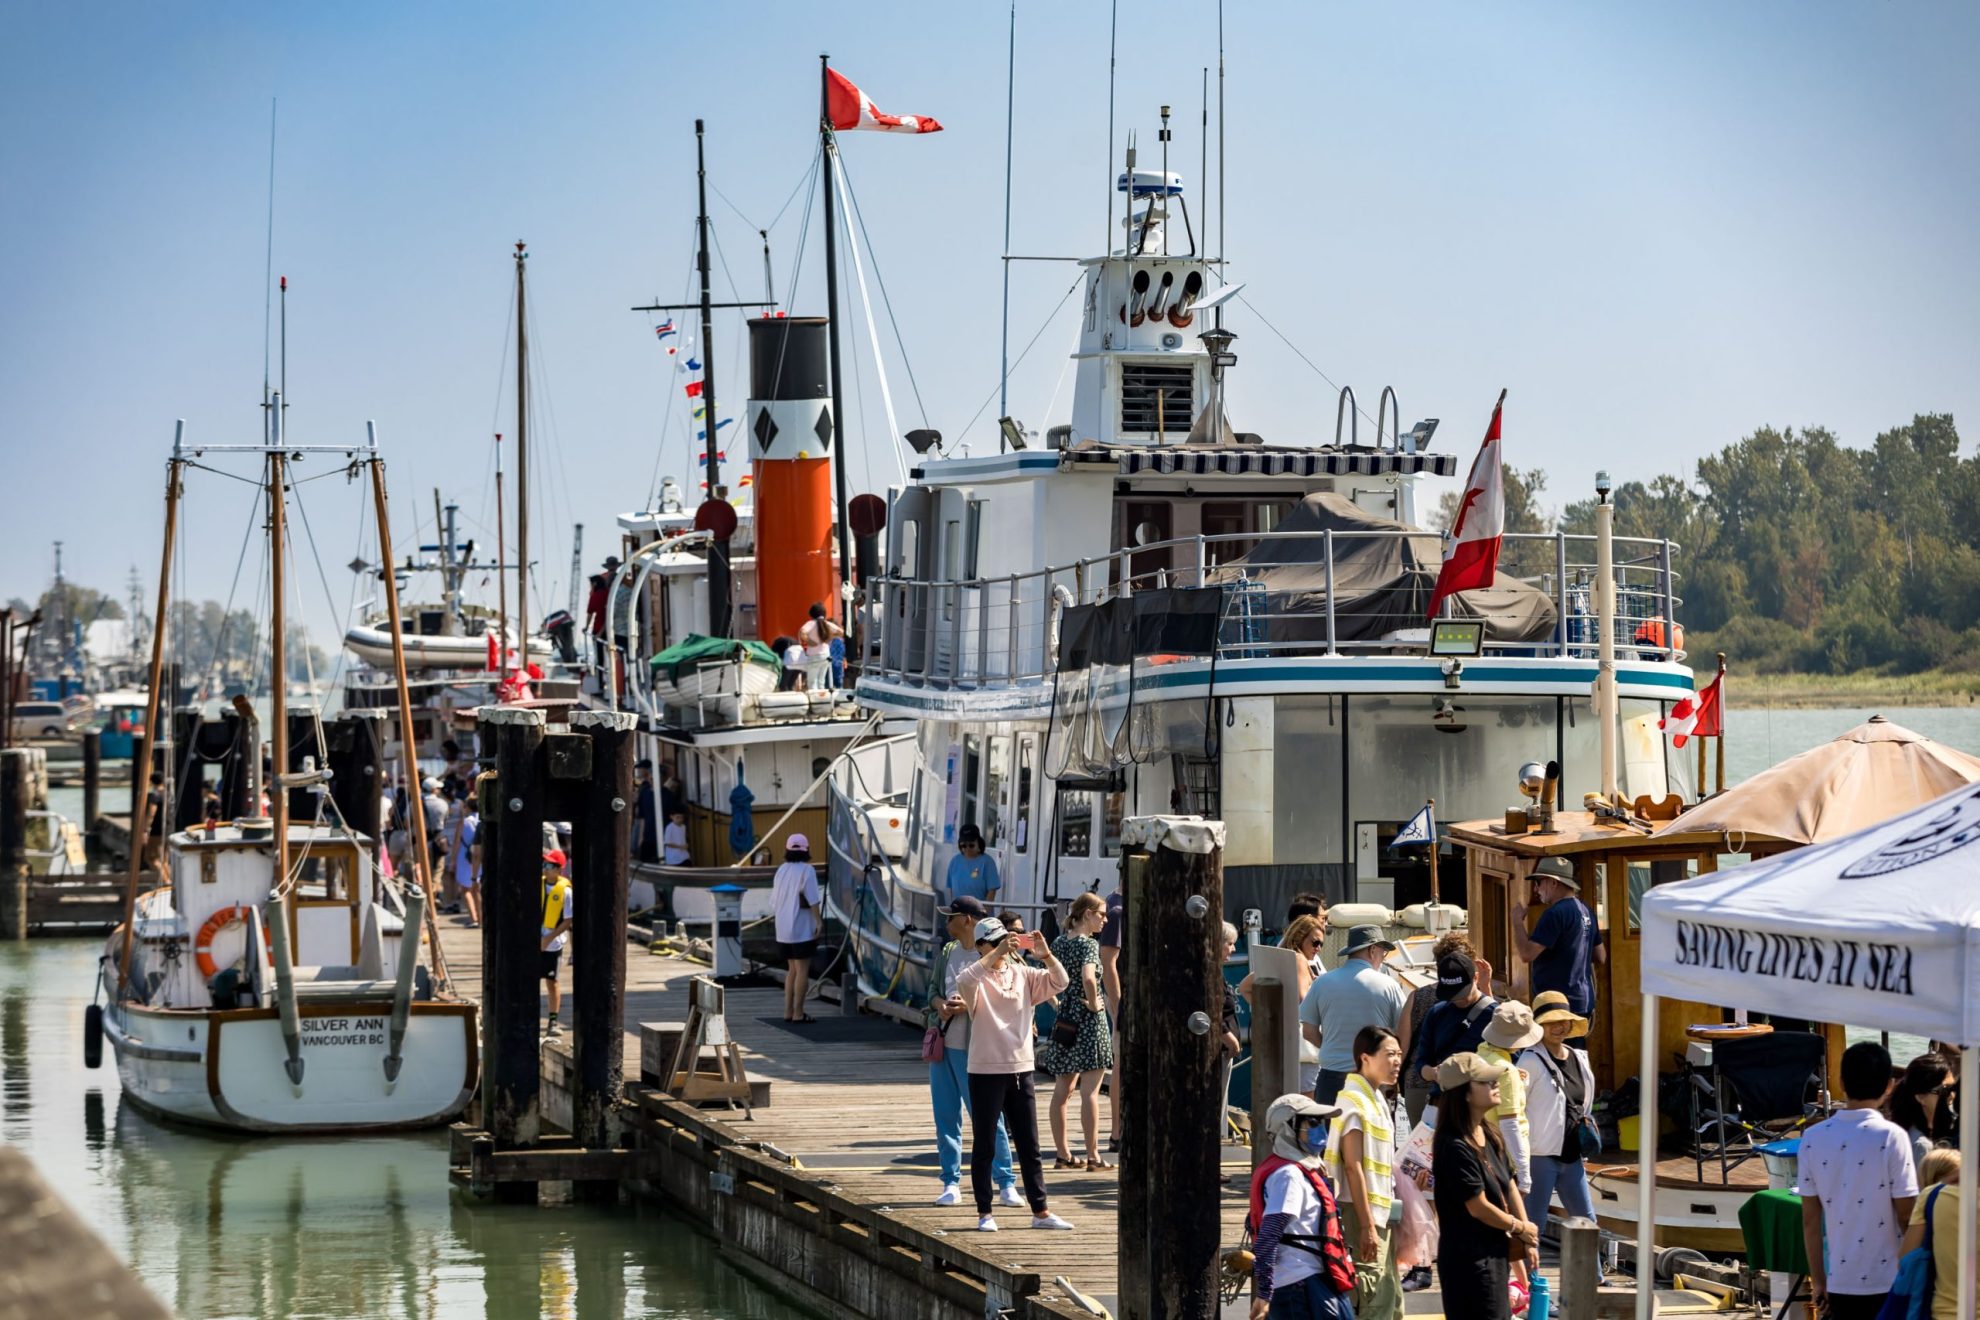 Britannia Shipyards docks with boats on display during Maritime Festival